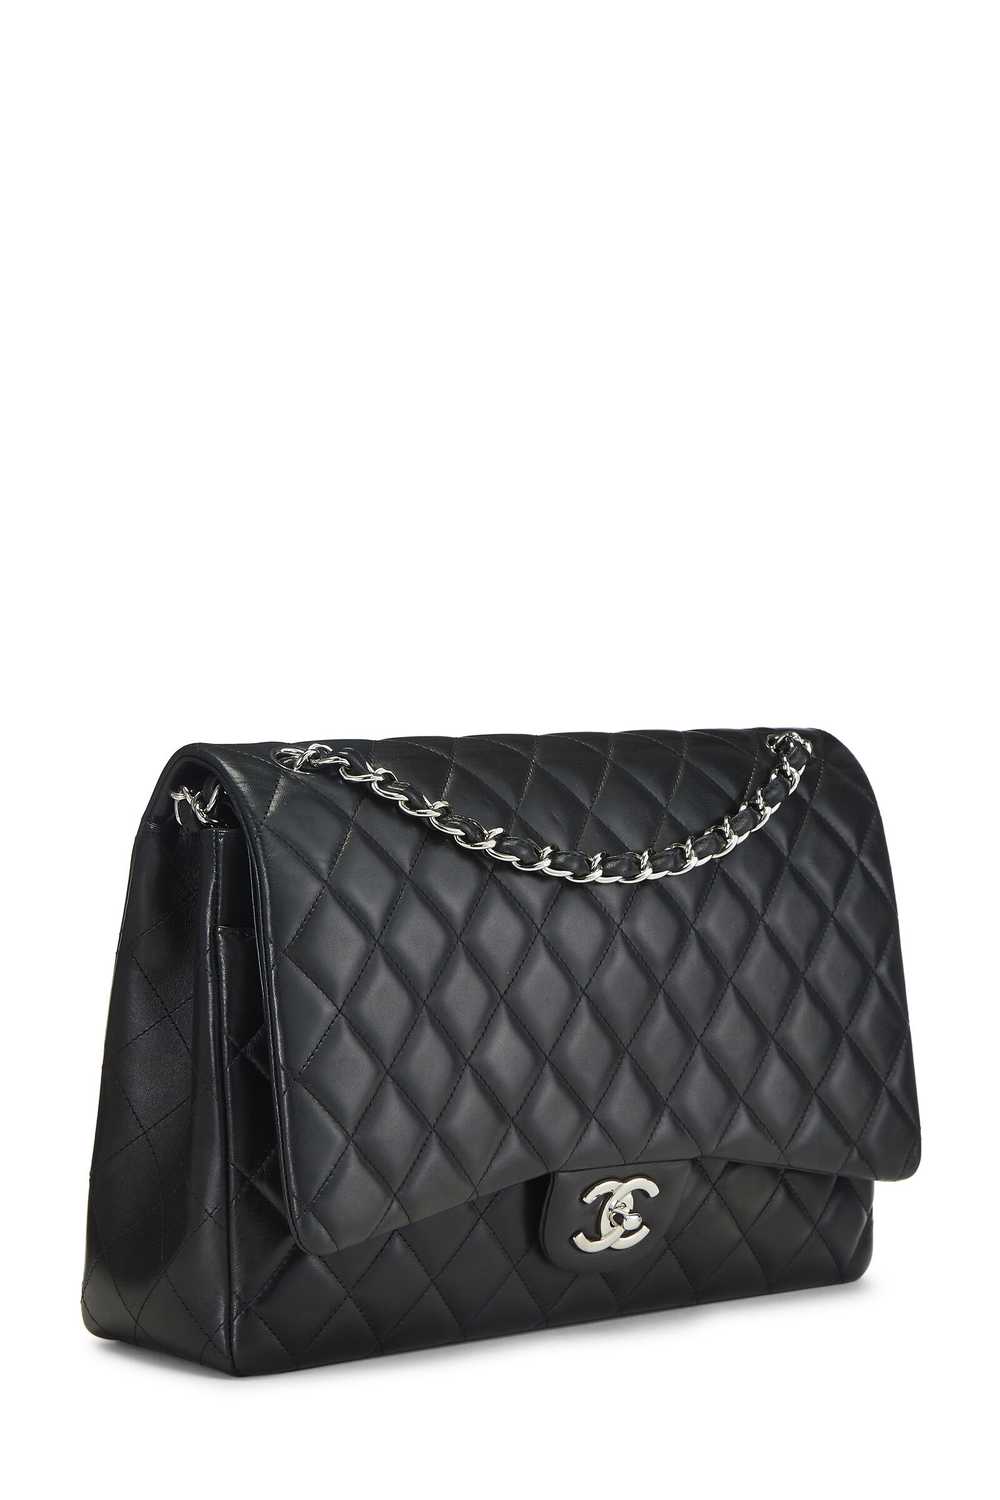 Black Quilted Lambskin New Classic Double Flap Ma… - image 3